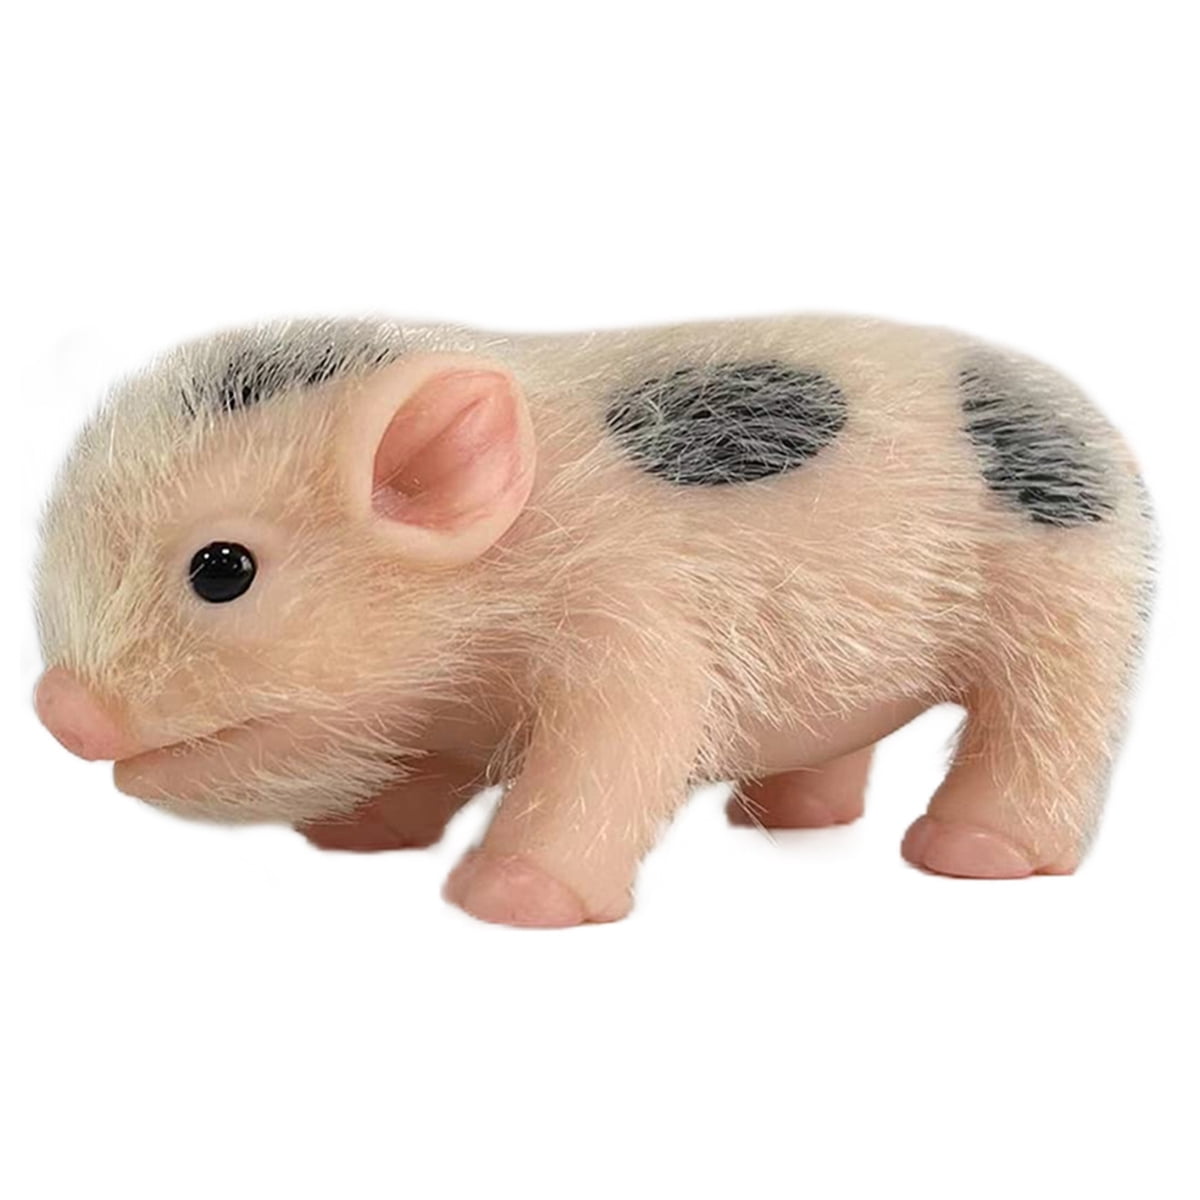 Eummy Silicone Pig Mini Silicone Animals Pig Set,5 Inch Pig Toys for  Girls&Boys, Realistic Cute Baby Piggy Doll Soft Body, Best Gifts for Kids,  Her